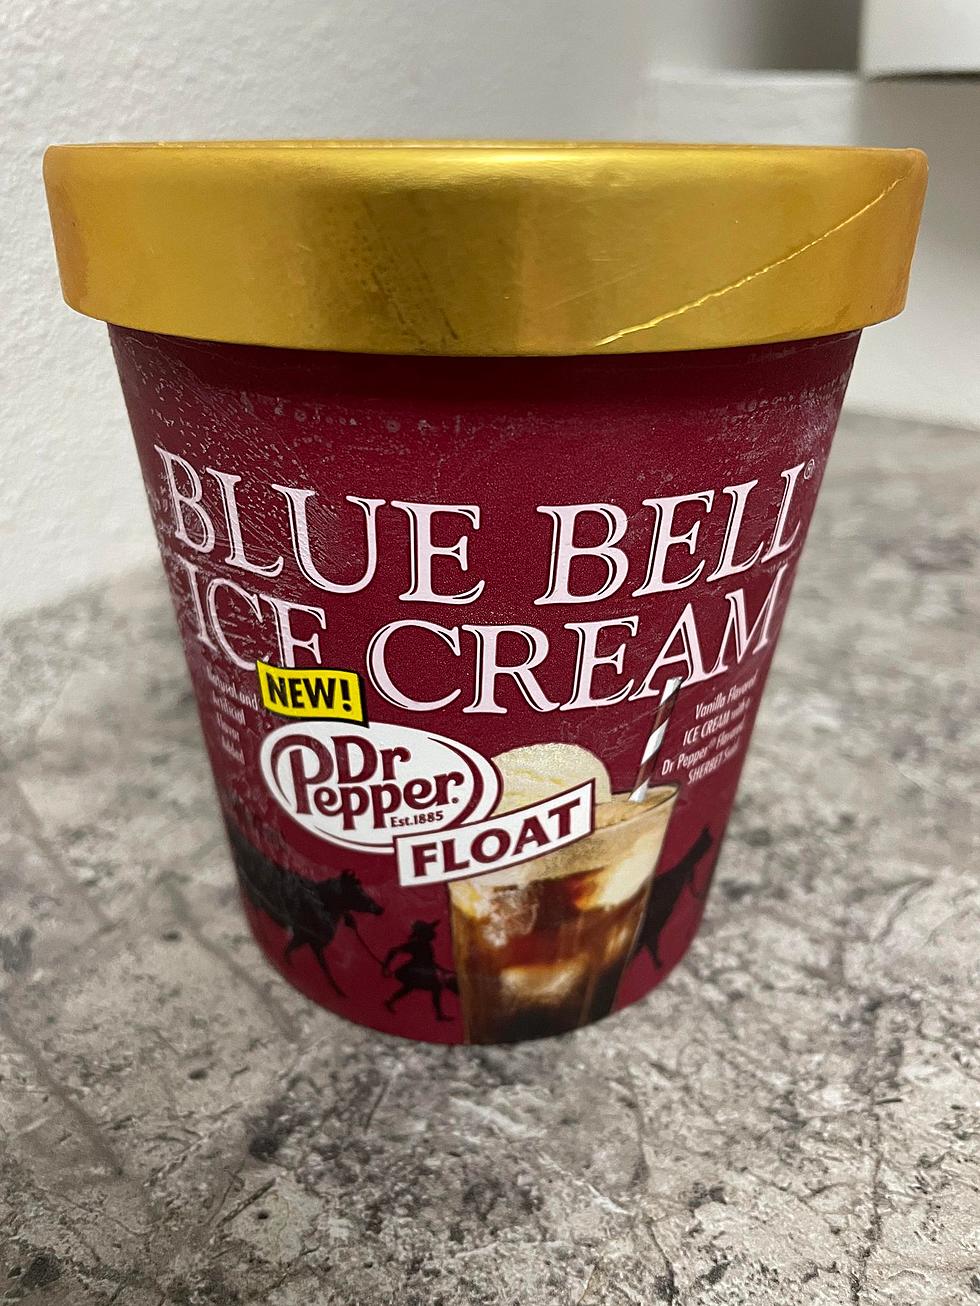 Is Blue Bell Dr. Pepper Float Ice Cream Worthy Of The Hype?